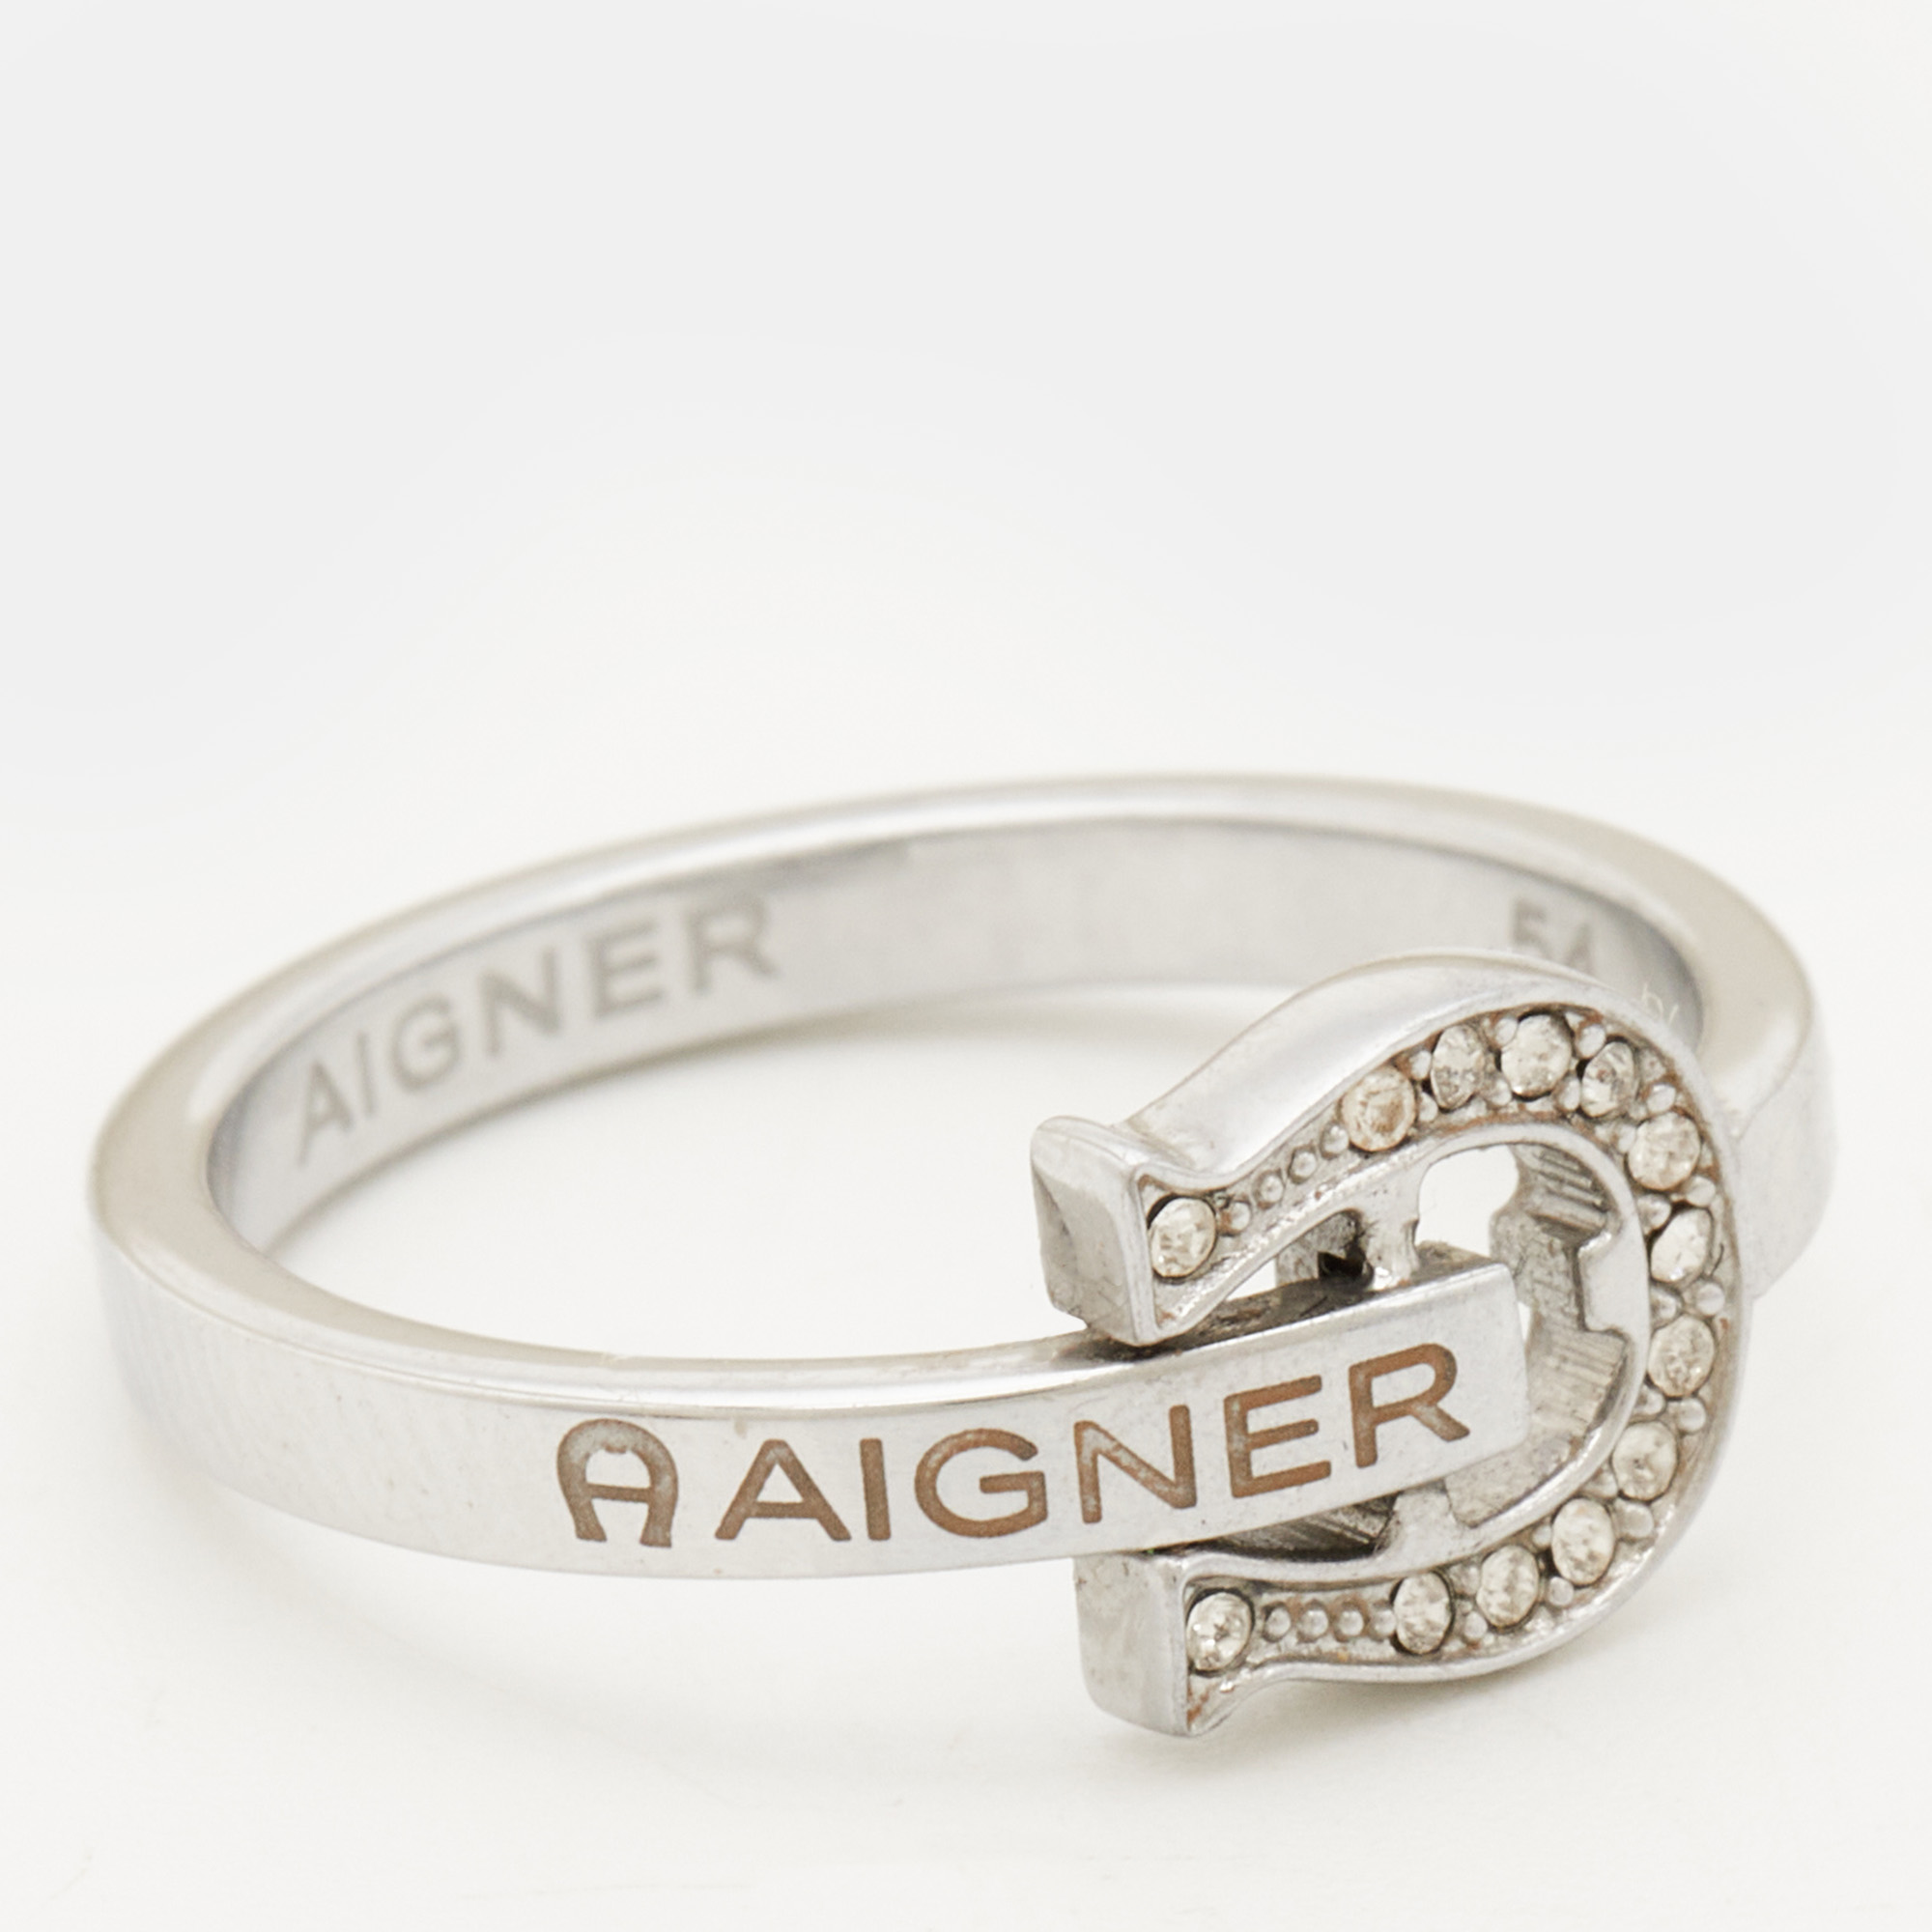 Aigner Crystals Silver Tone Ring Size 53